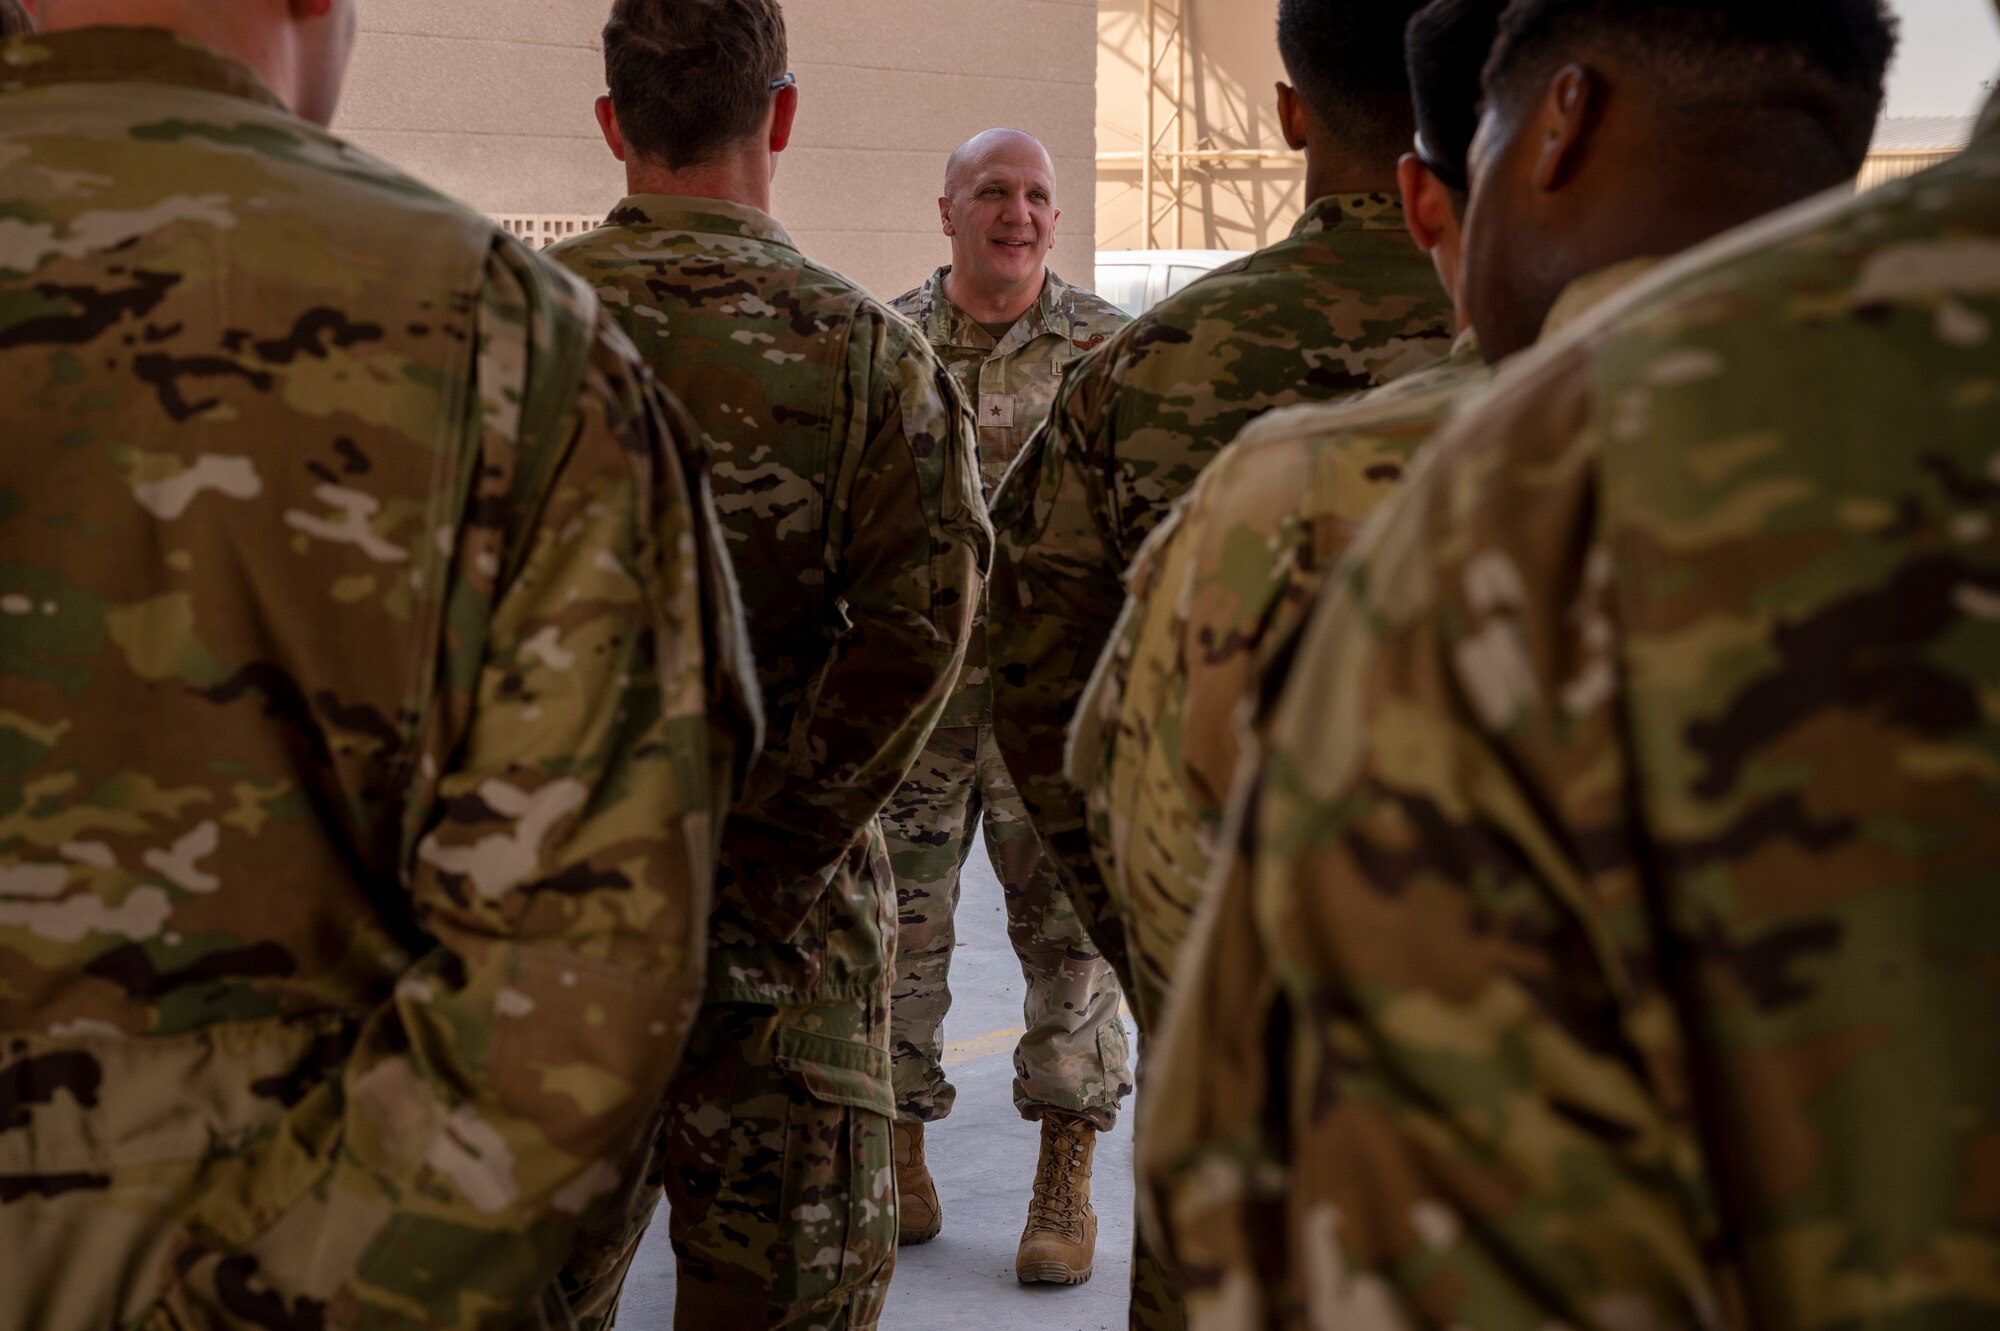 Brig. Gen. Gerald Donohue, 379th Air Expeditionary Wing commander, speaks to Airmen from the 379th Expeditionary Civil Engineer Squadron after signing the Fire Prevention Week proclamation Oct. 5, 2021, at Al Udeid Air Base, Qatar.